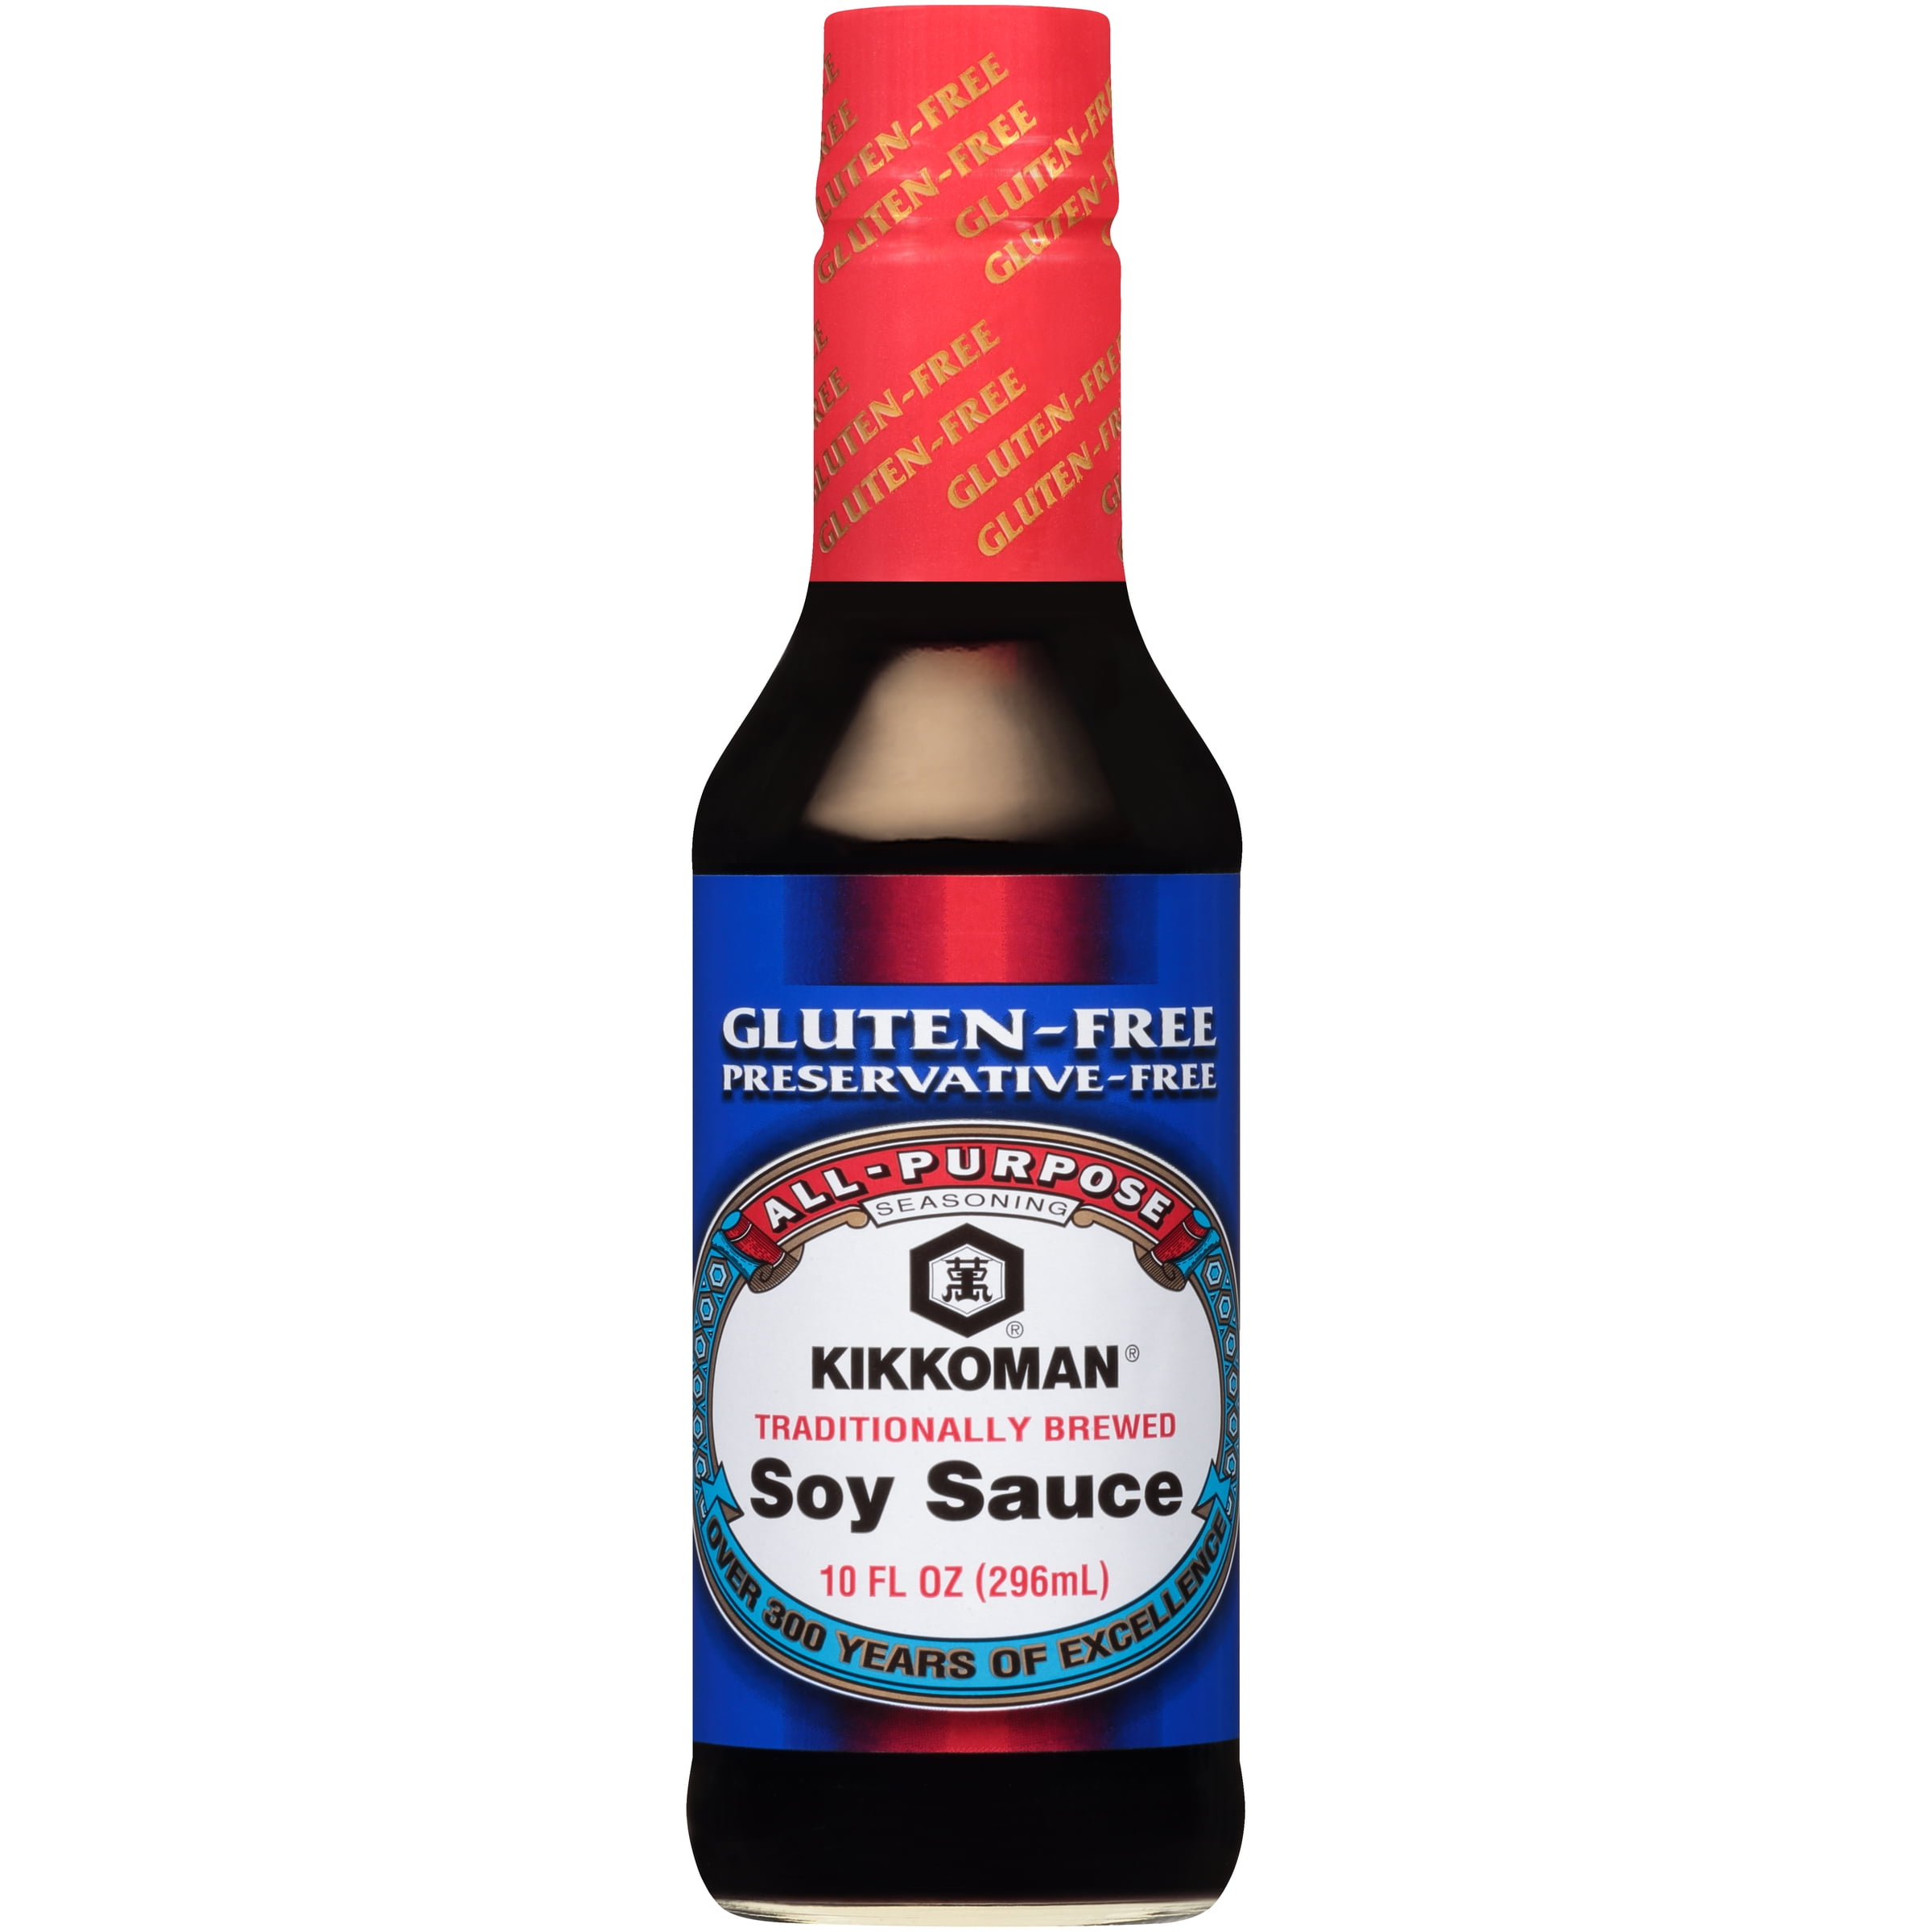 The dark soy sauce gives the dish a nice caramel color and provides a. Ligh...